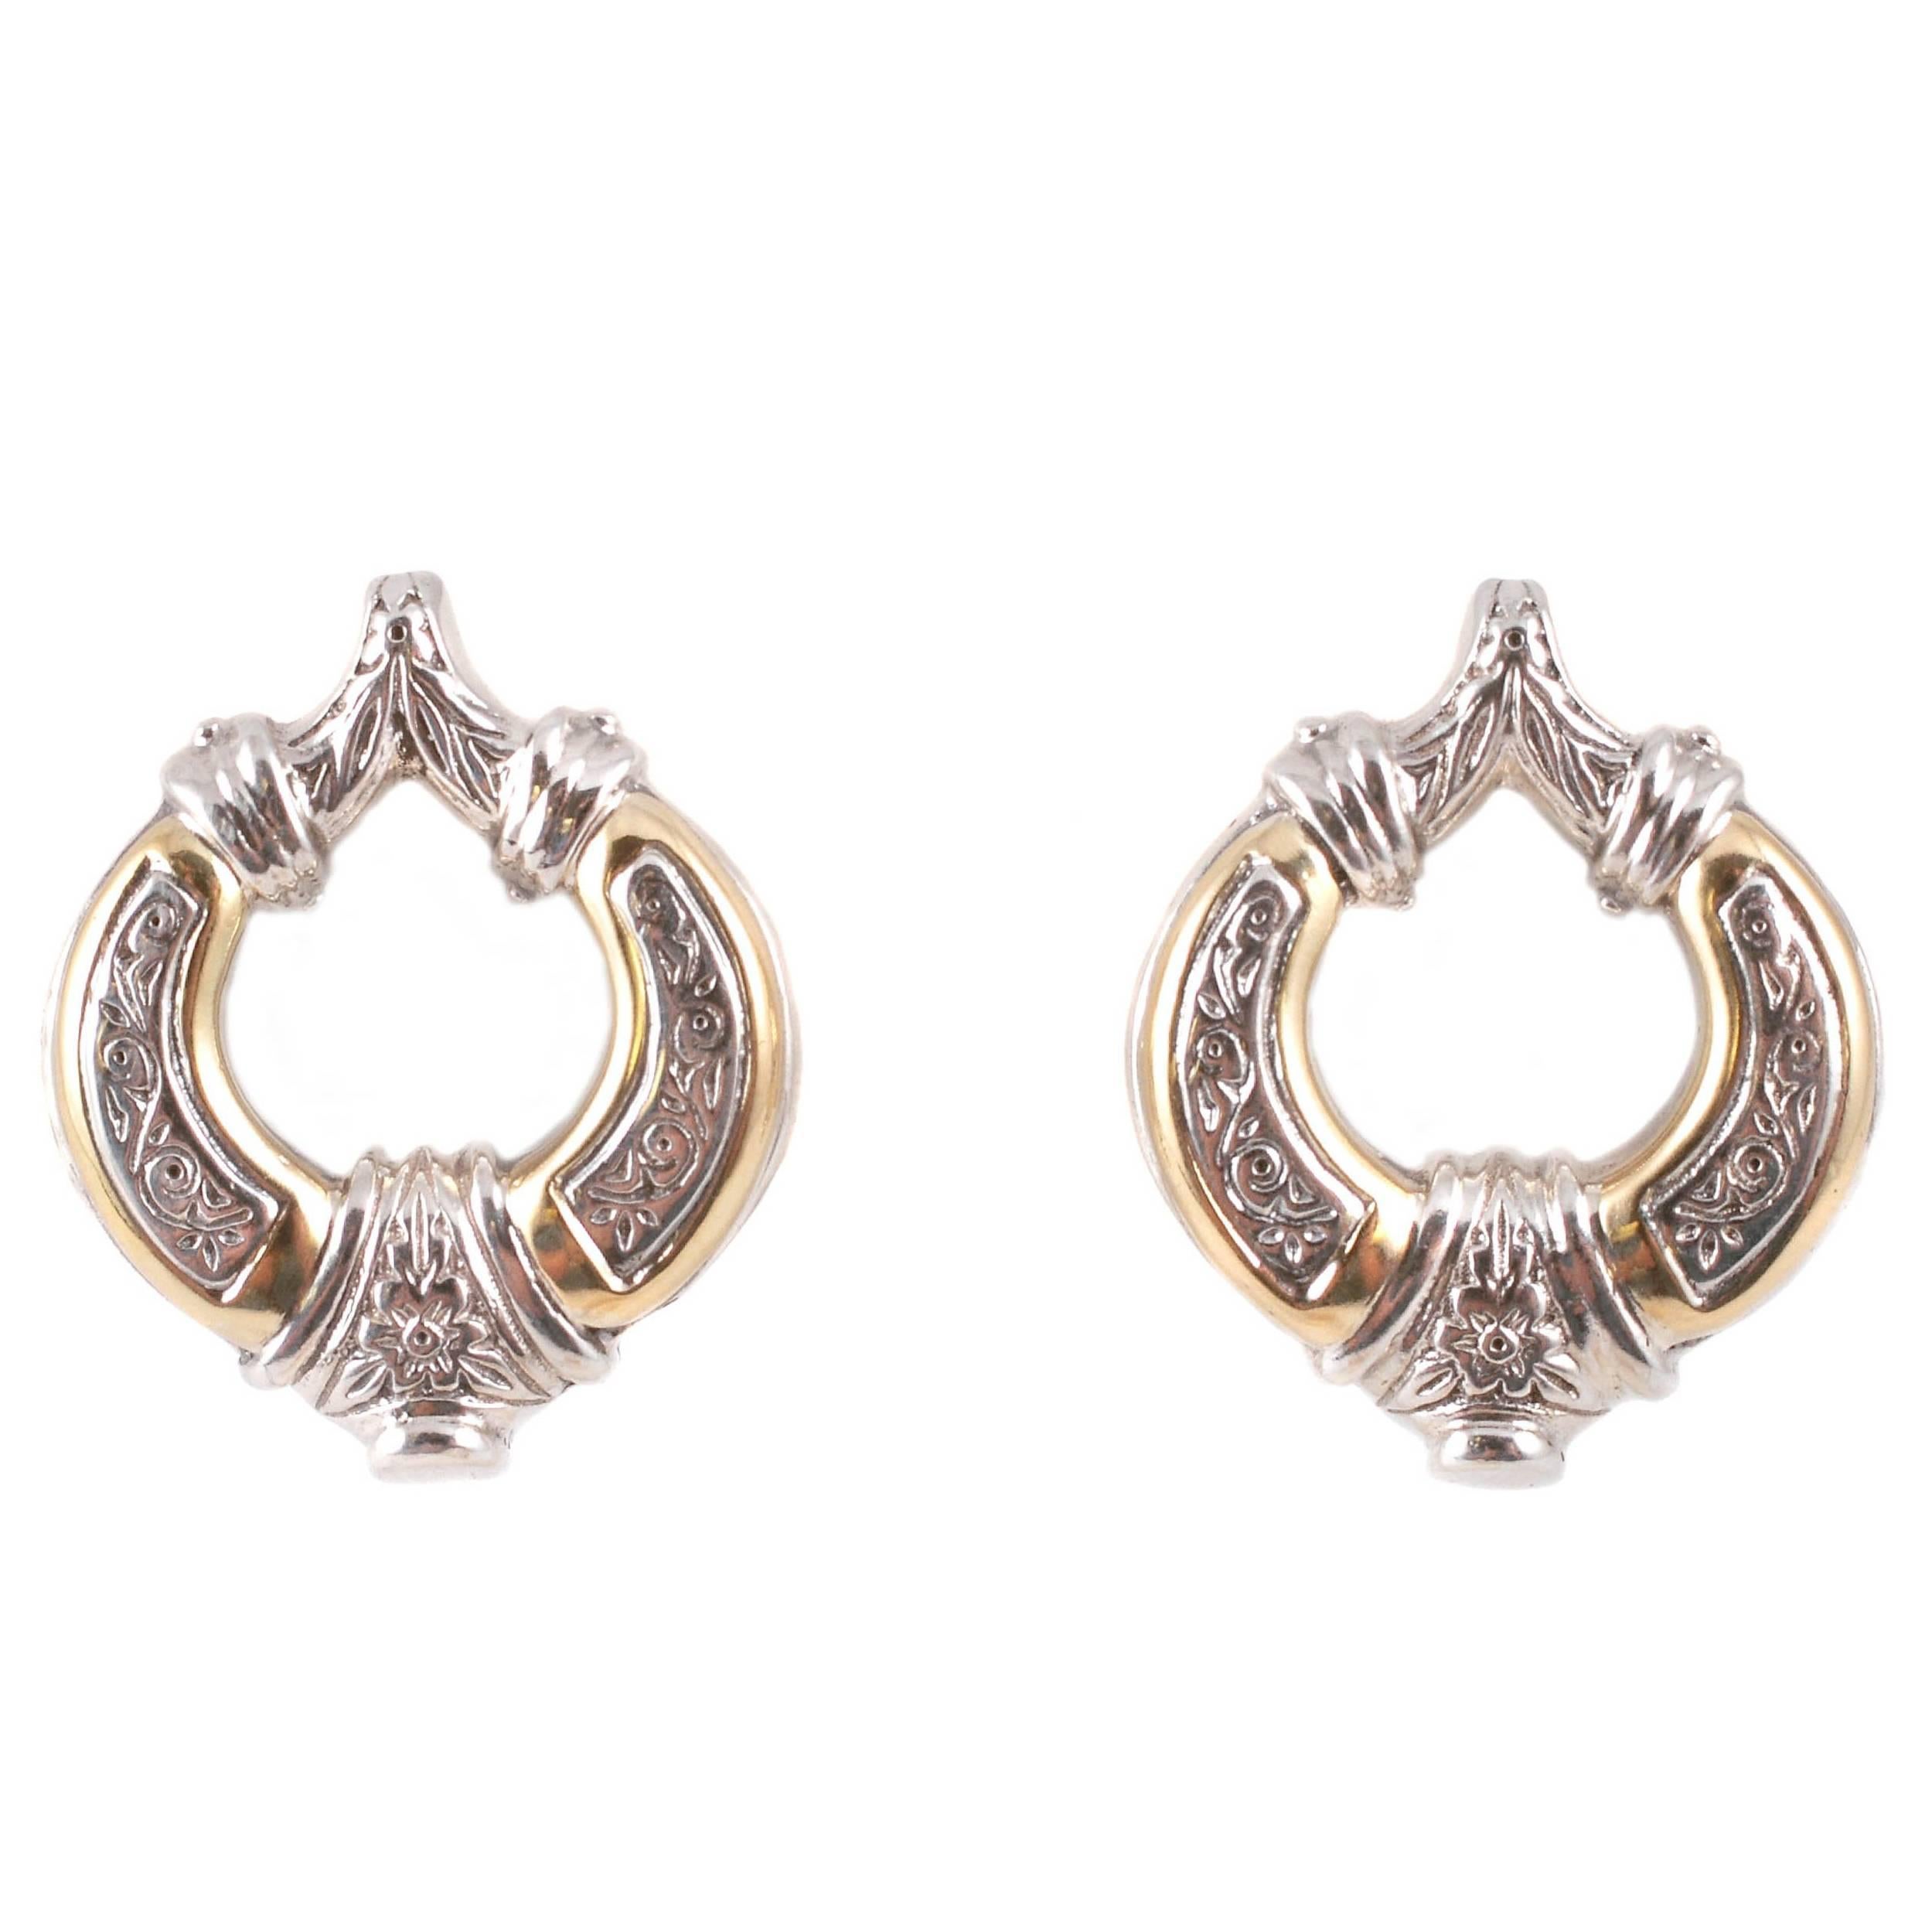 "Konstantino" Yellow Gold Sterling Silver Clip Earrings